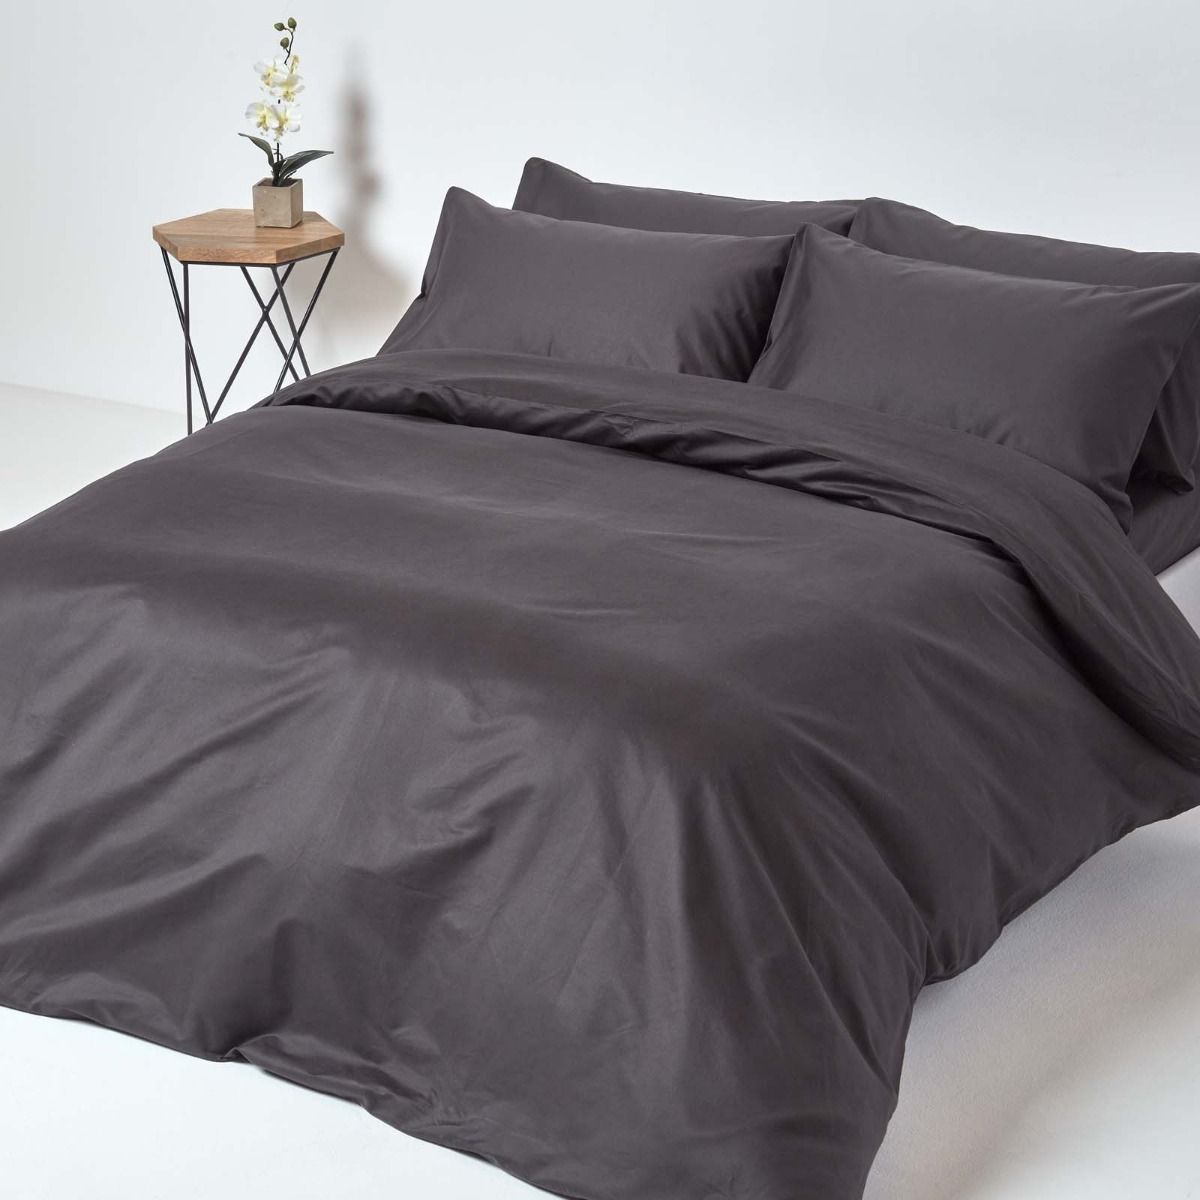 Dark Charcoal Grey Egyptian Cotton, Charcoal King Size Duvet Cover